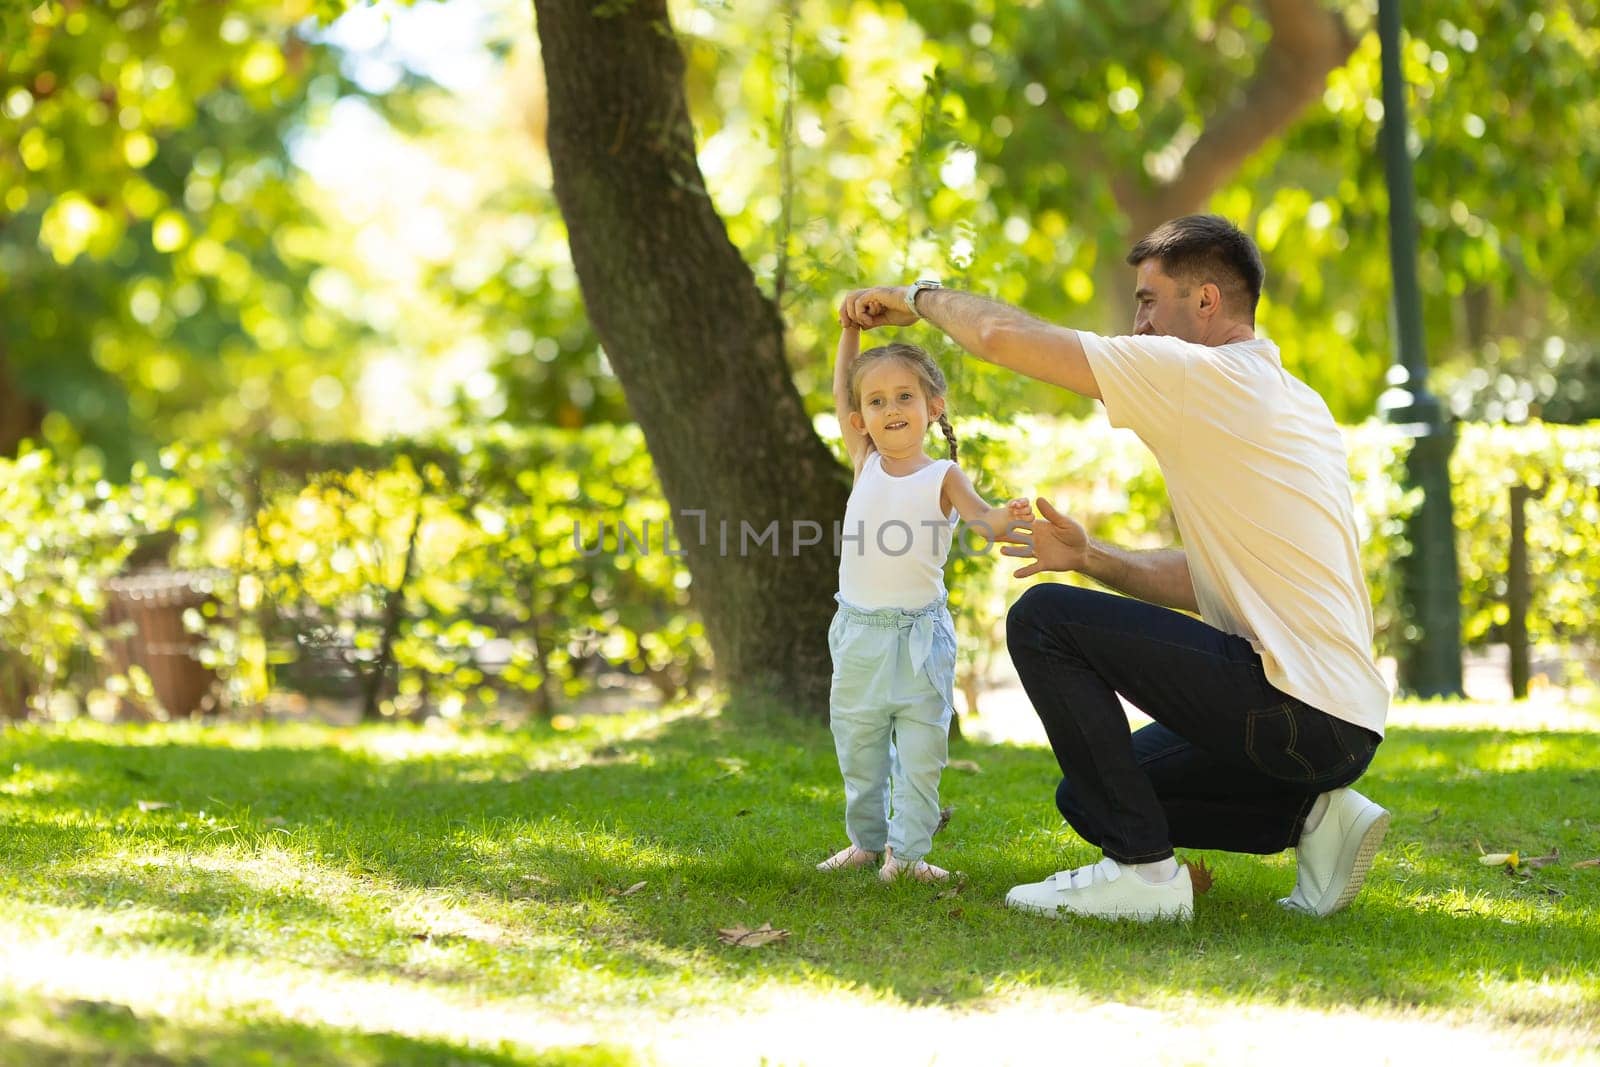 A little girl walking in the park holding her father by hand. Mid shot